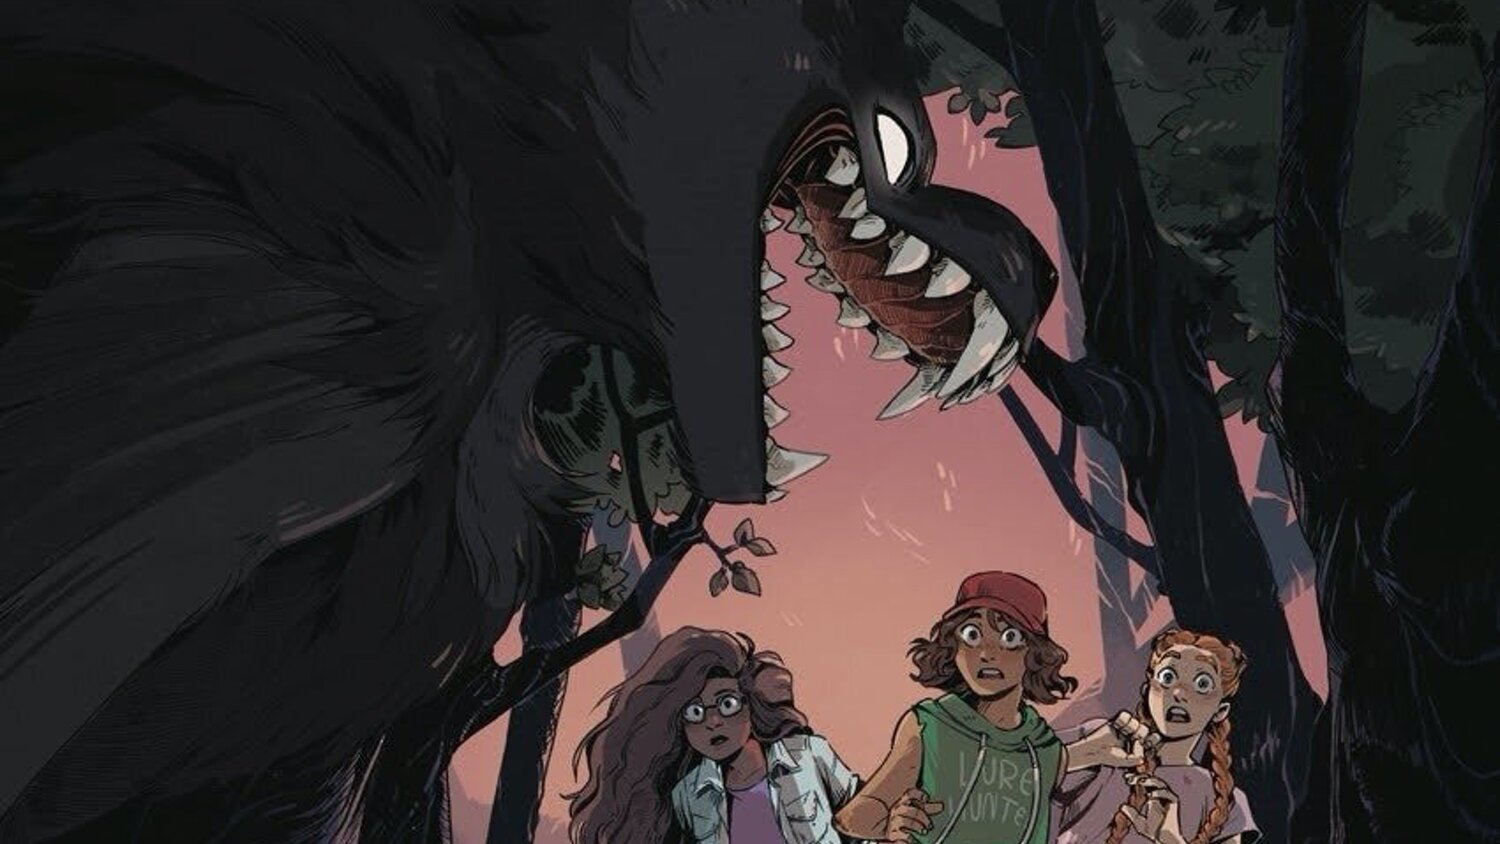 GOOSEBUMPS: SECRETS OF THE SWAMP Comic Book Announced with Cover Art.